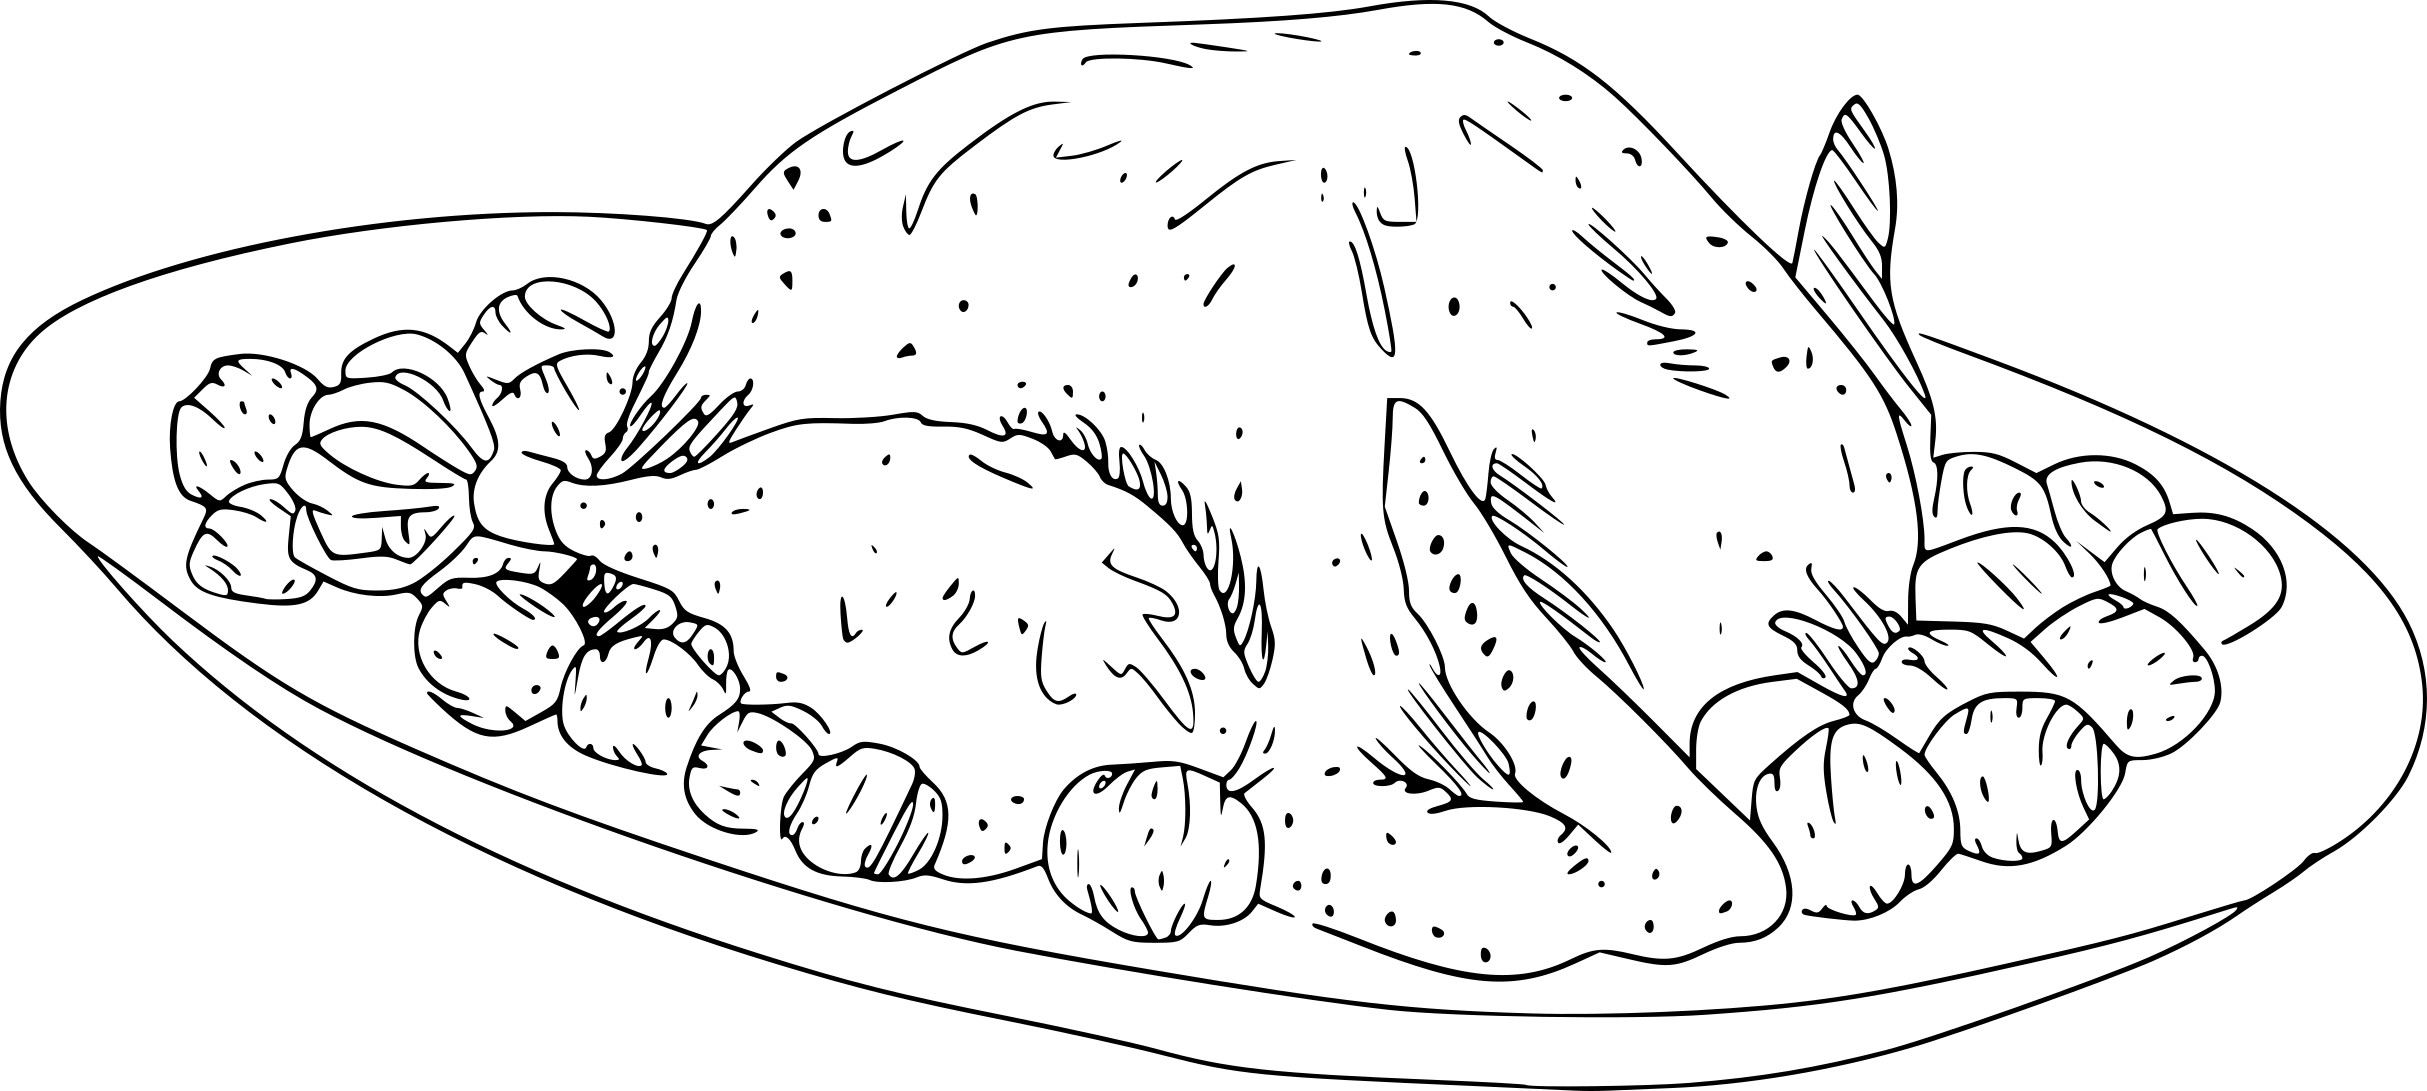 Christmas Turkey coloring page